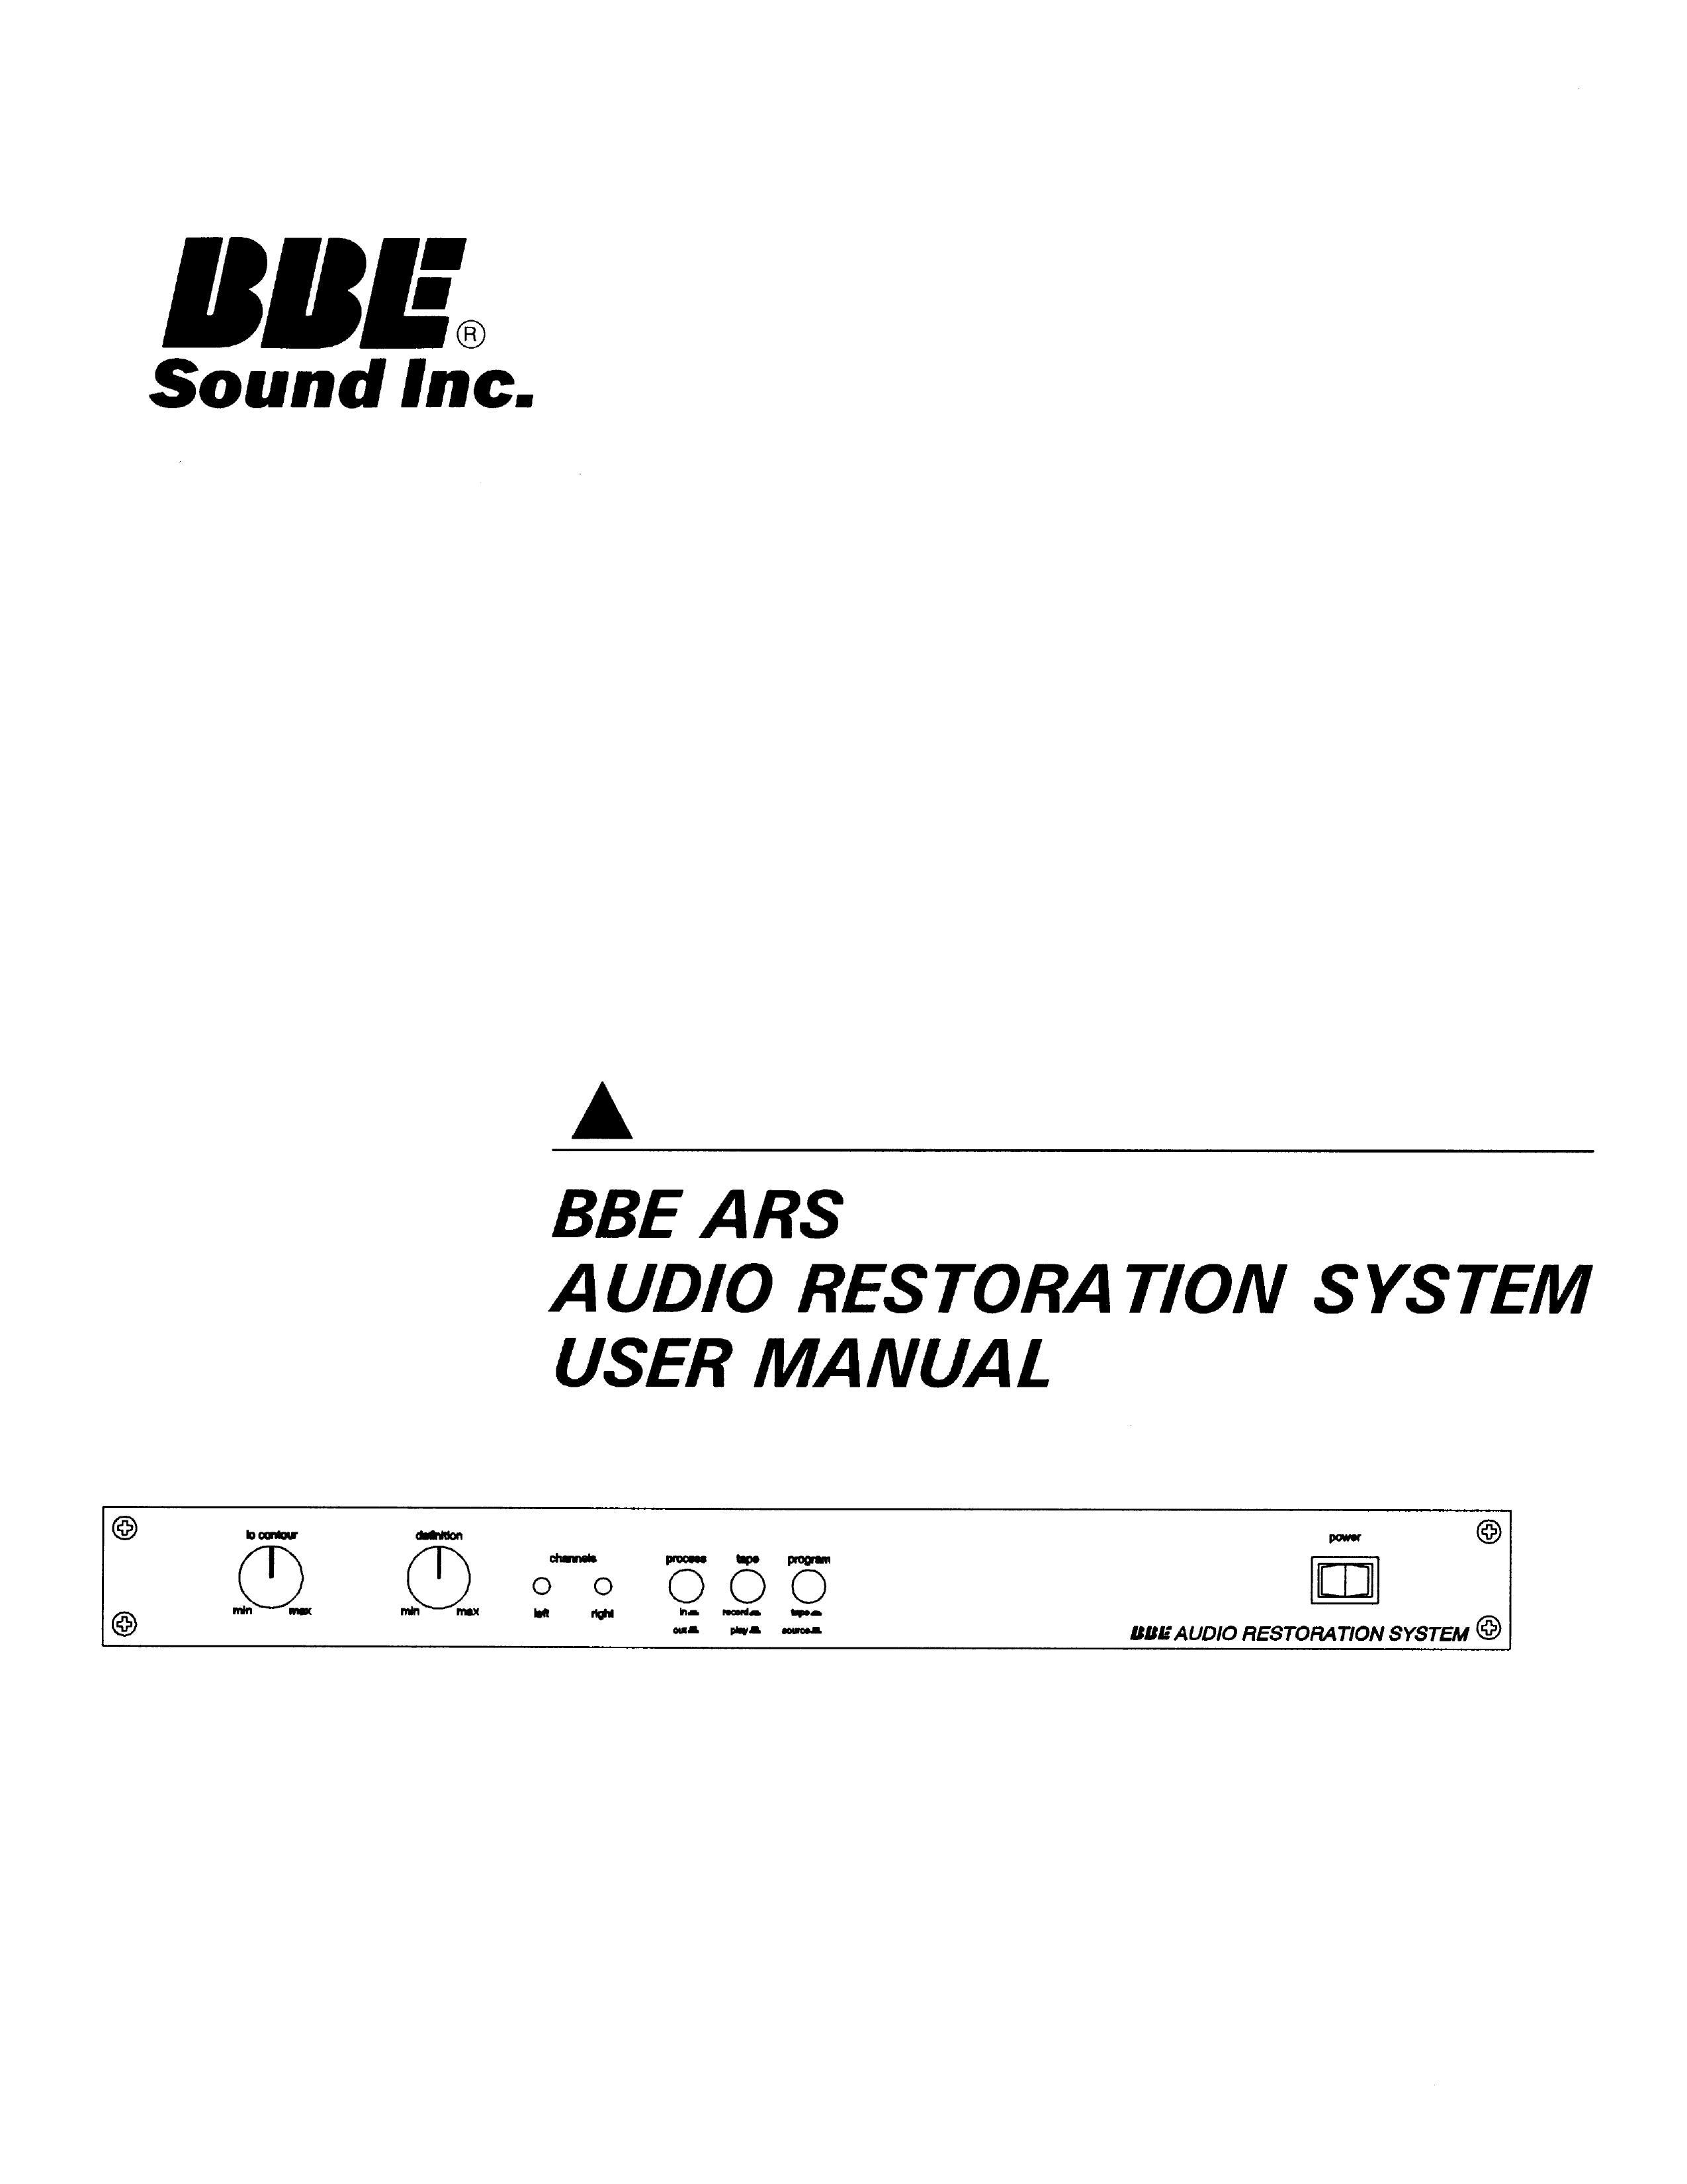 BBE BBE ARS Music Mixer User Manual